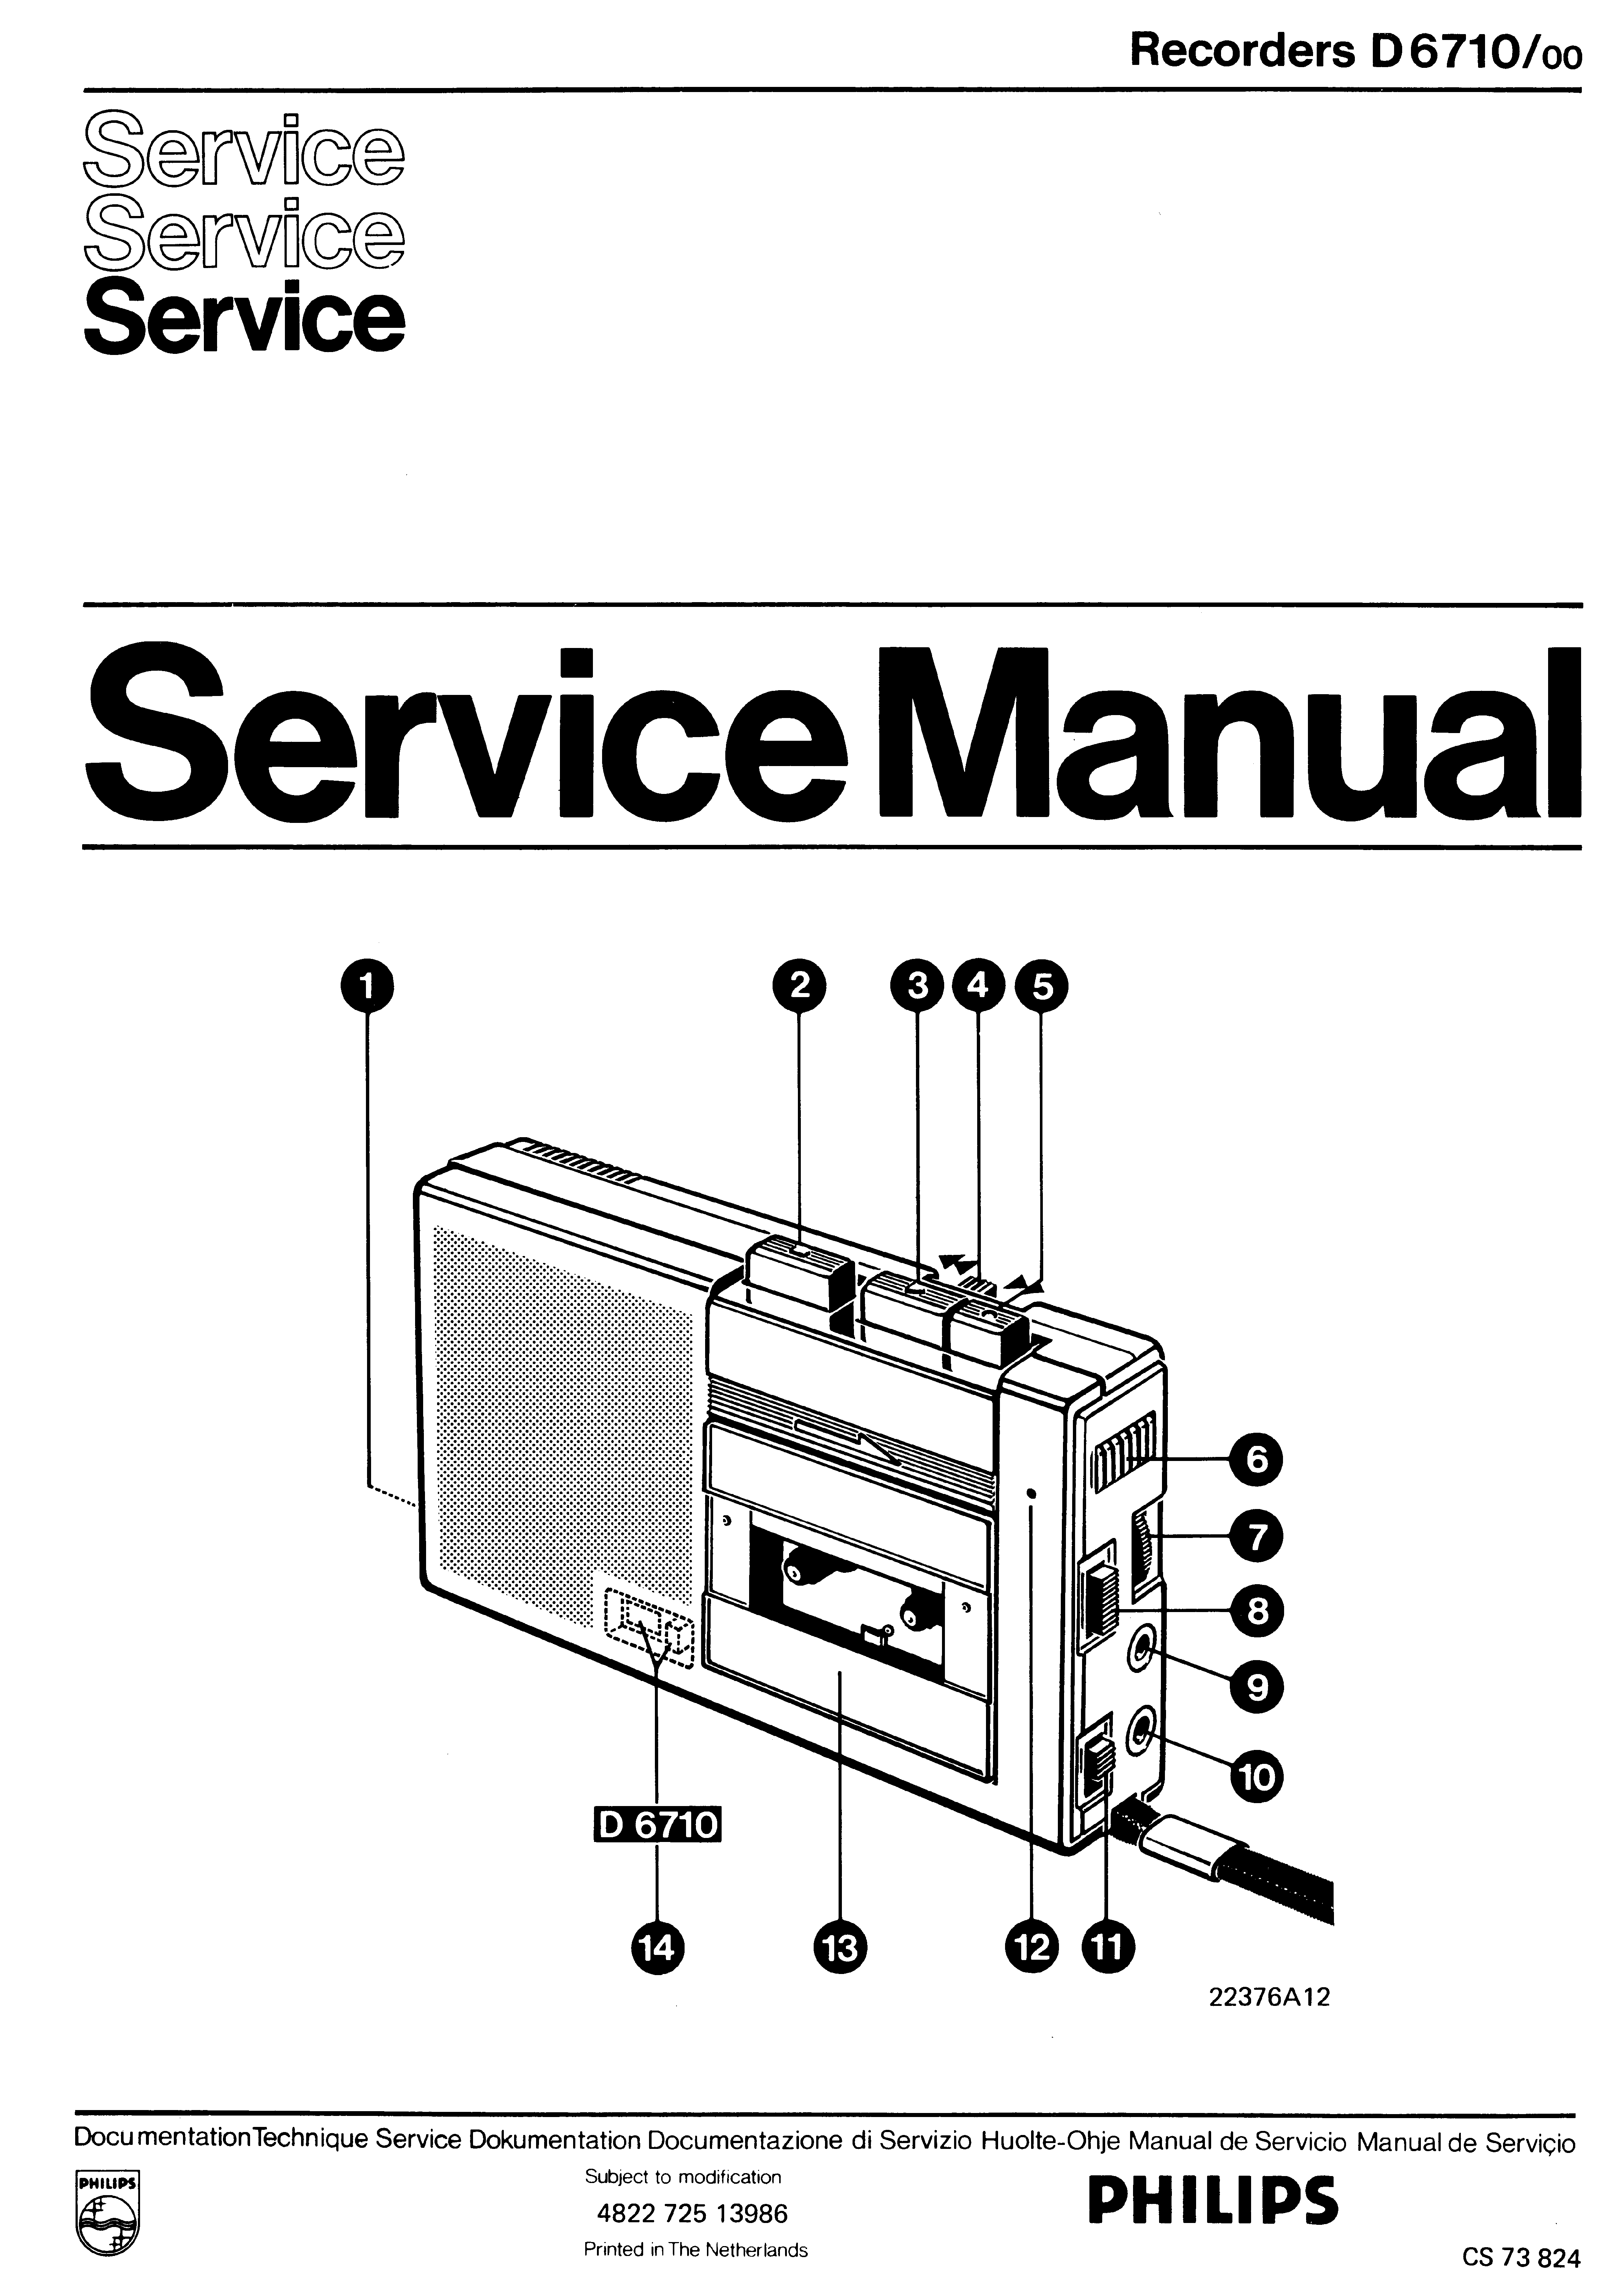 PHILIPS RECORDERS D6710 SM service manual (1st page)